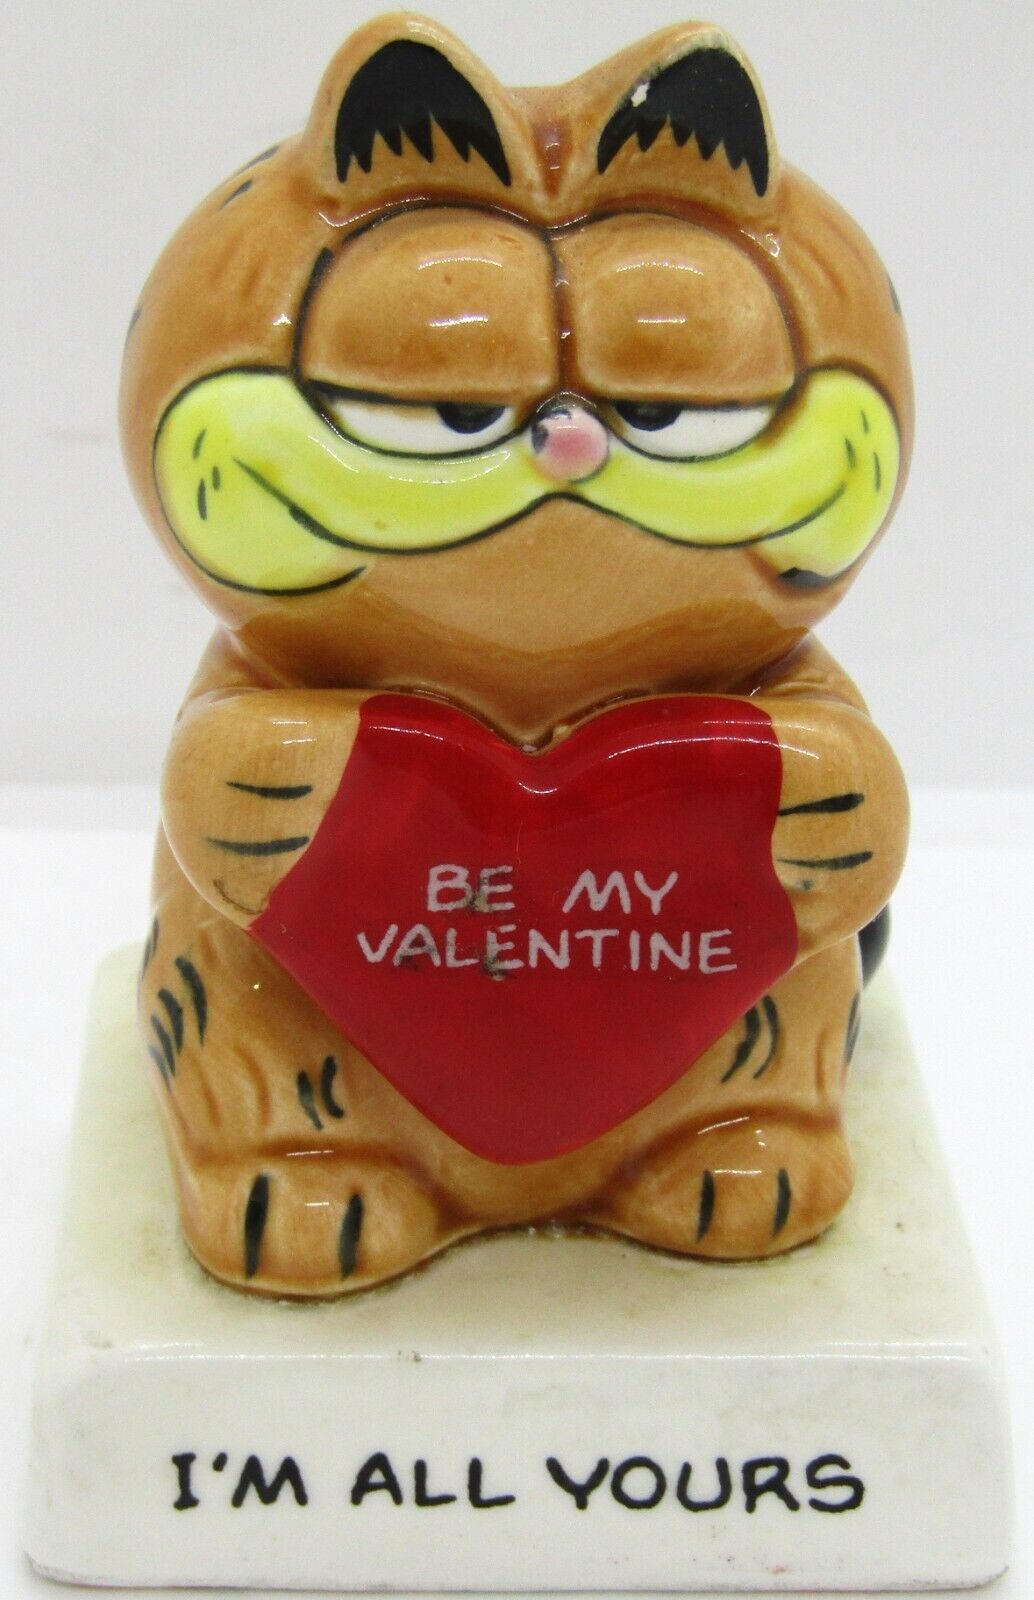 Vintage 1978 1981 Garfield Enesco Figurine “Be My Valentine, I’m All Yours”